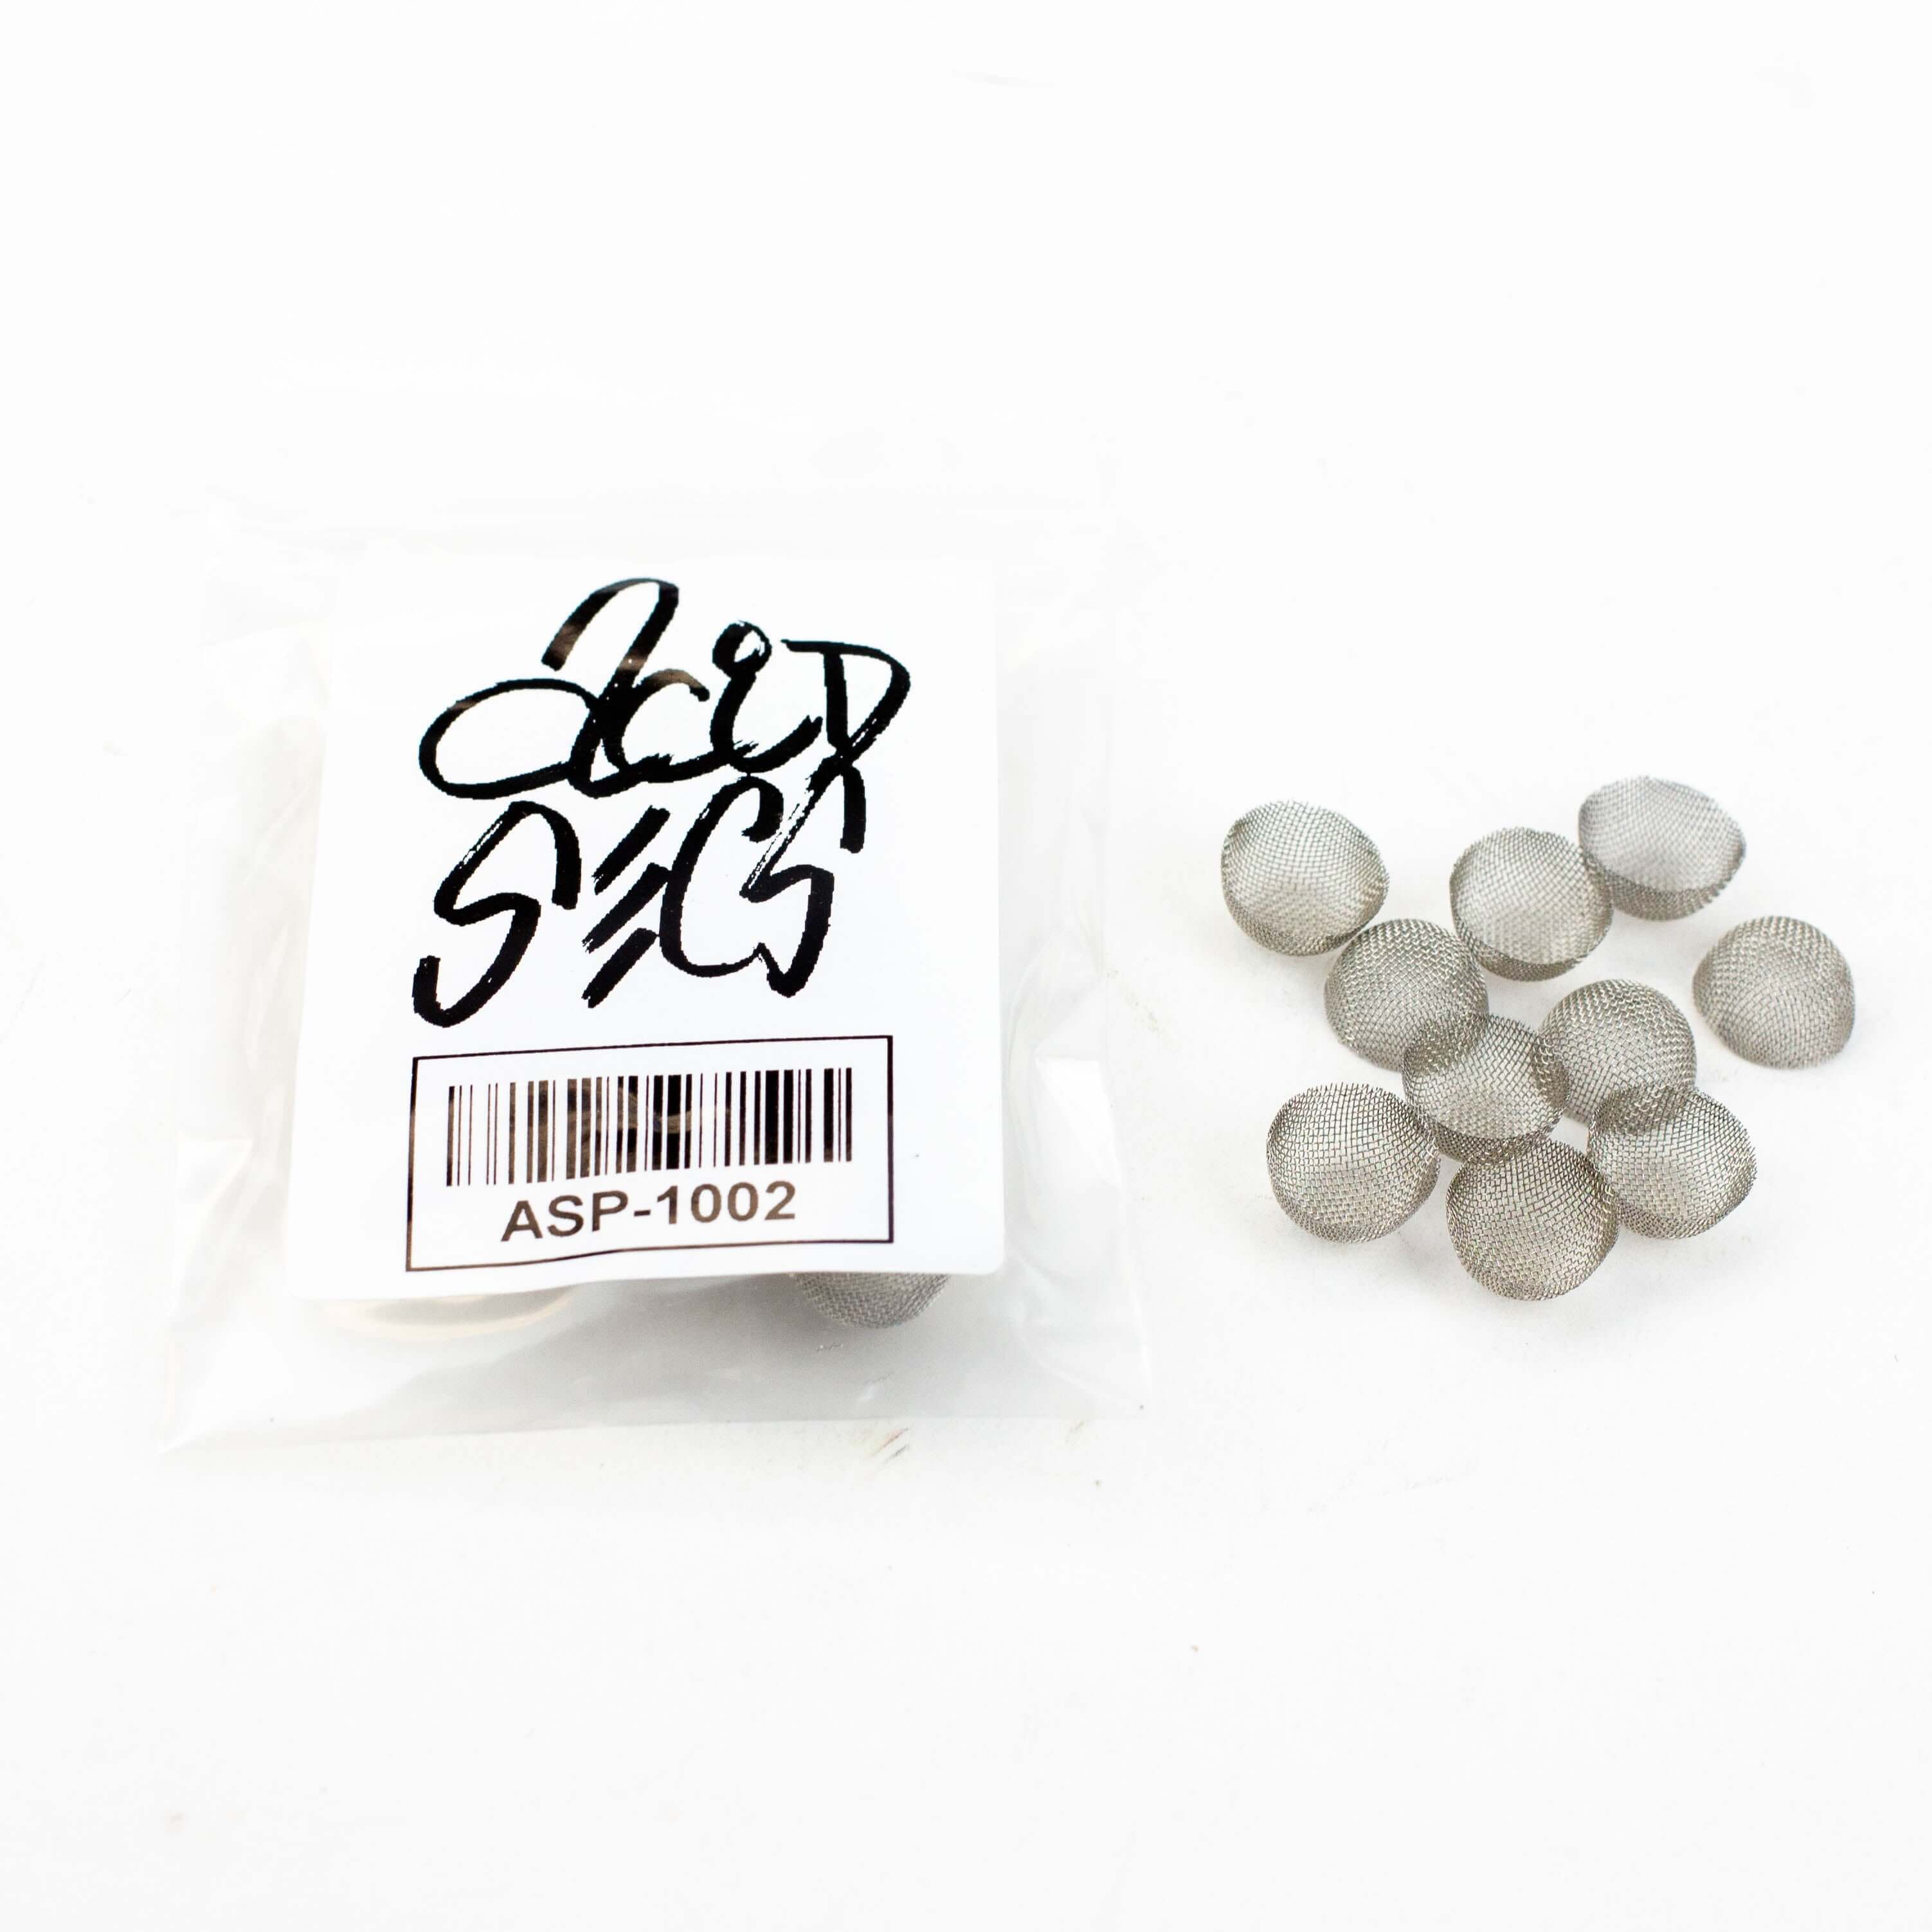 Acid Secs - 10 Pack of Preformed 13 mm Diameter Bowl Screens
Acid Secs Productions Inc.
10 pieces of bowl screens per pack 13mm diameter Preformed fine screen Eligible for $15 Flat Rate Shipping
Screens, Smoking Essentials